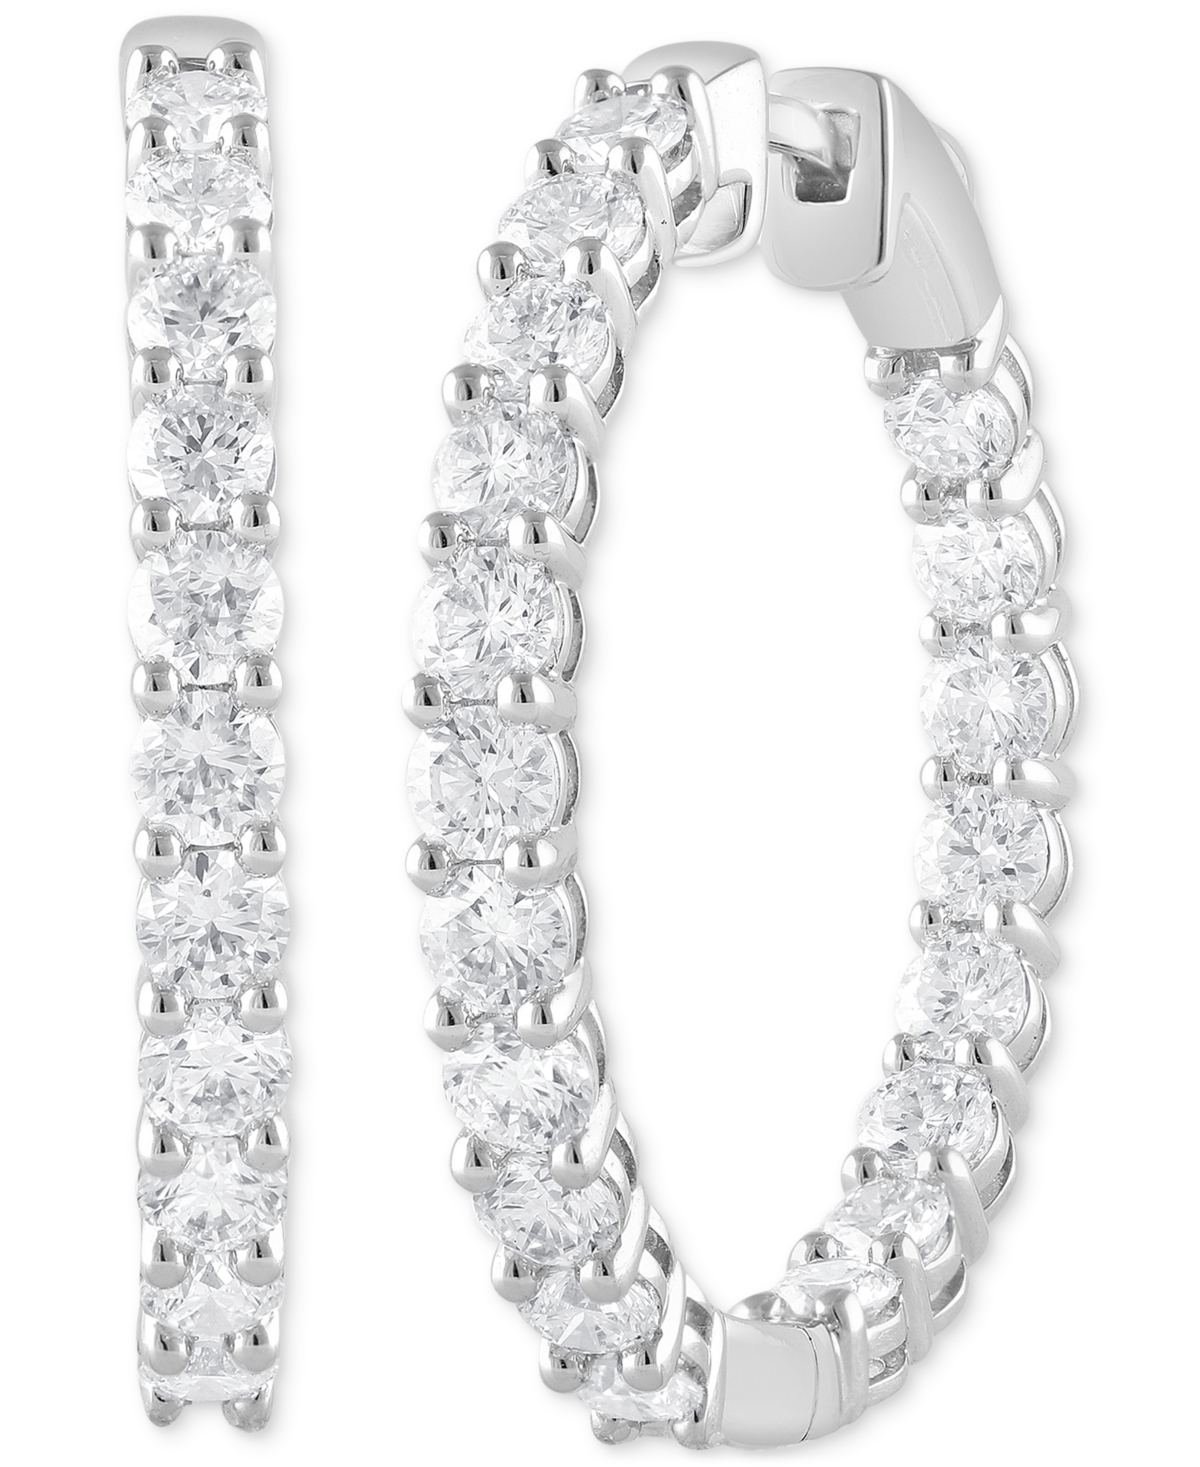 Lab Grown Diamond In & Out Small Hoop Earrings (3 ct. t.w.) in 14k White Gold, 1" - K White Gold